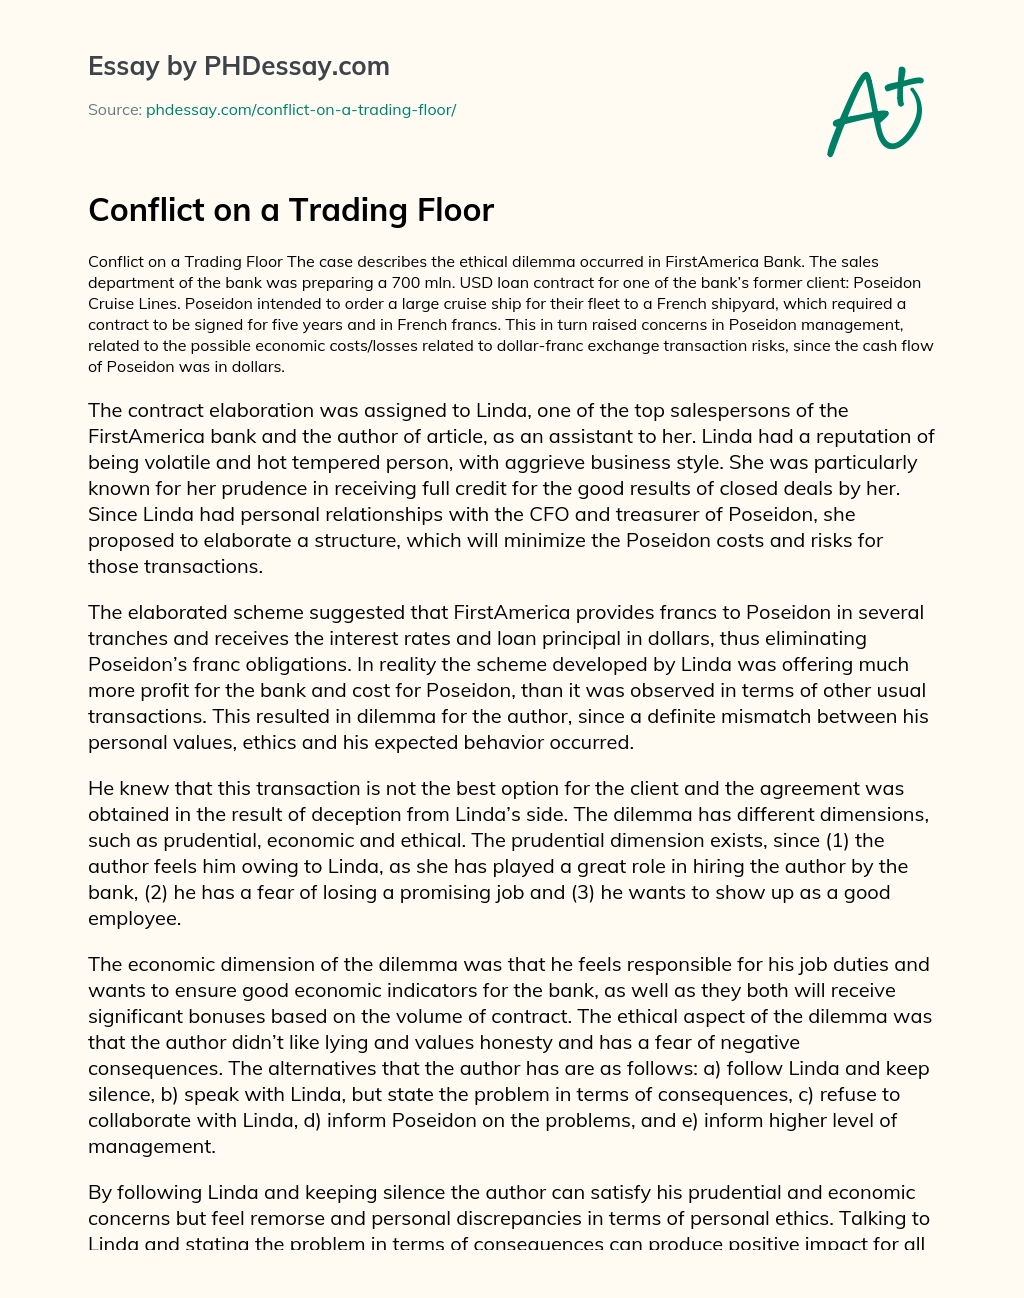 Conflict on a Trading Floor essay